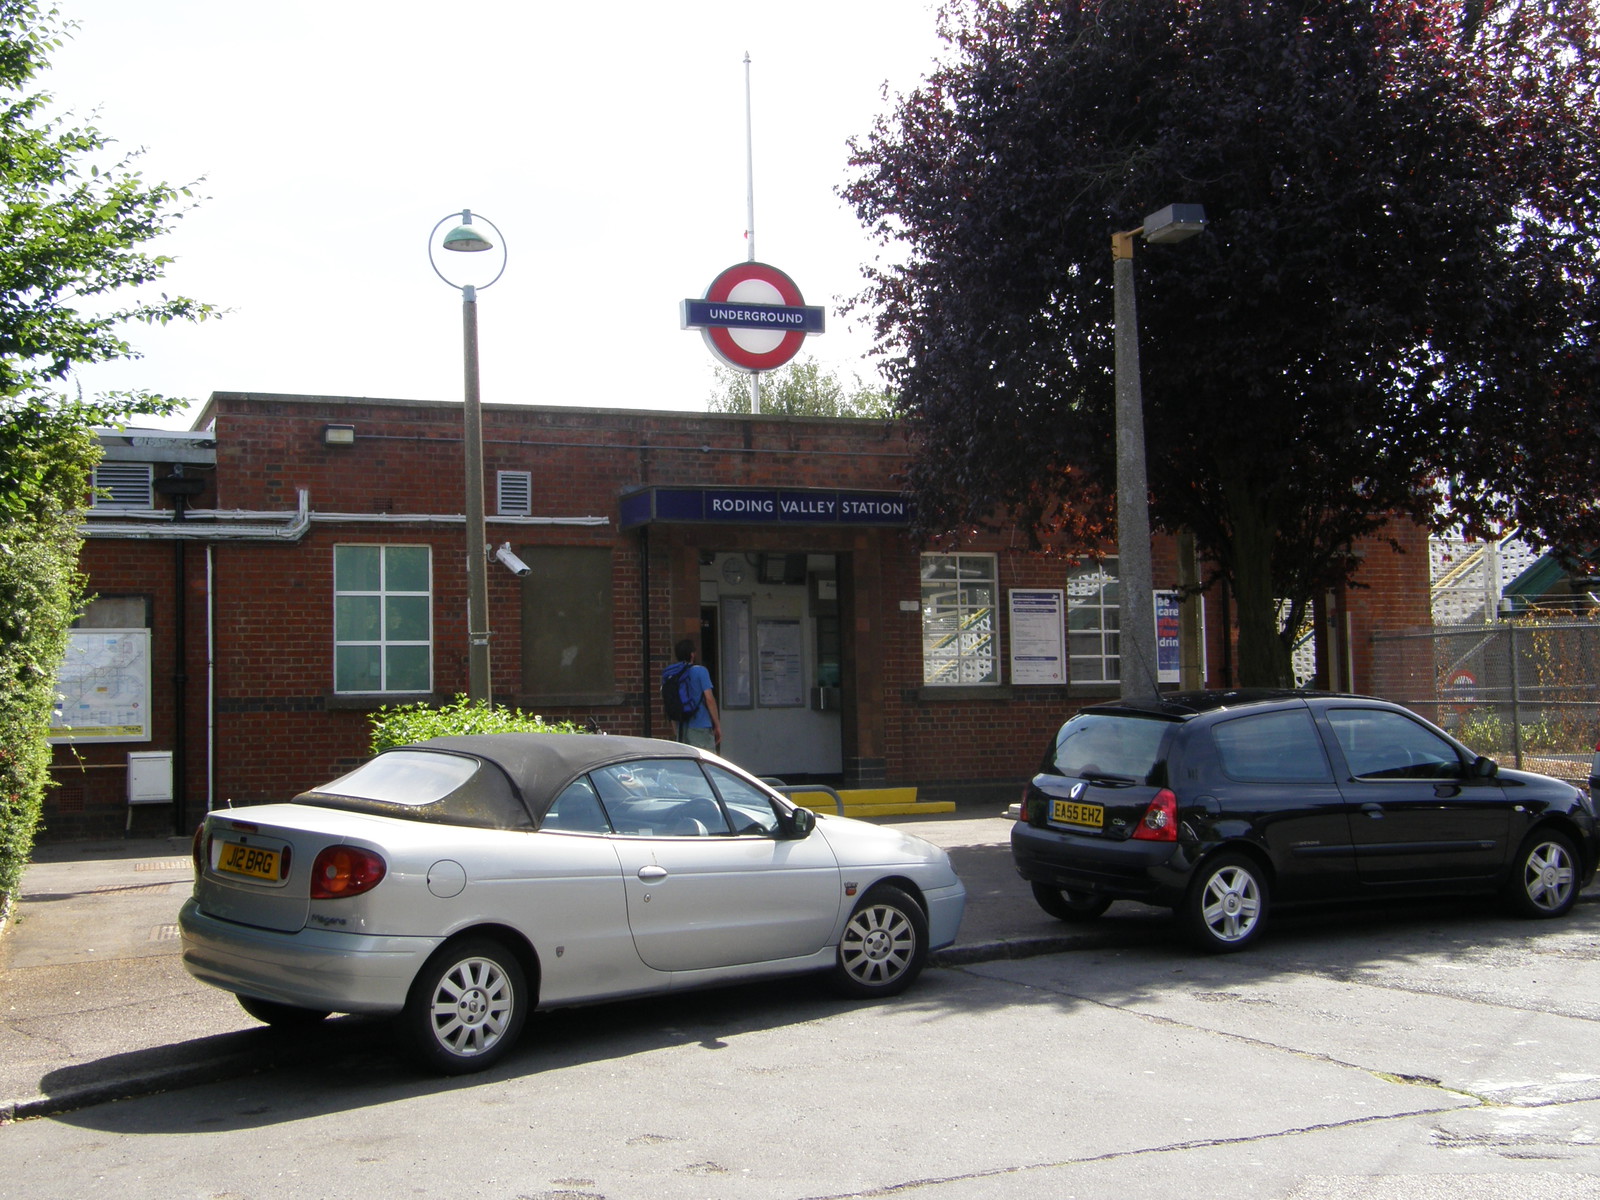 Image from Barkingside to Woodford